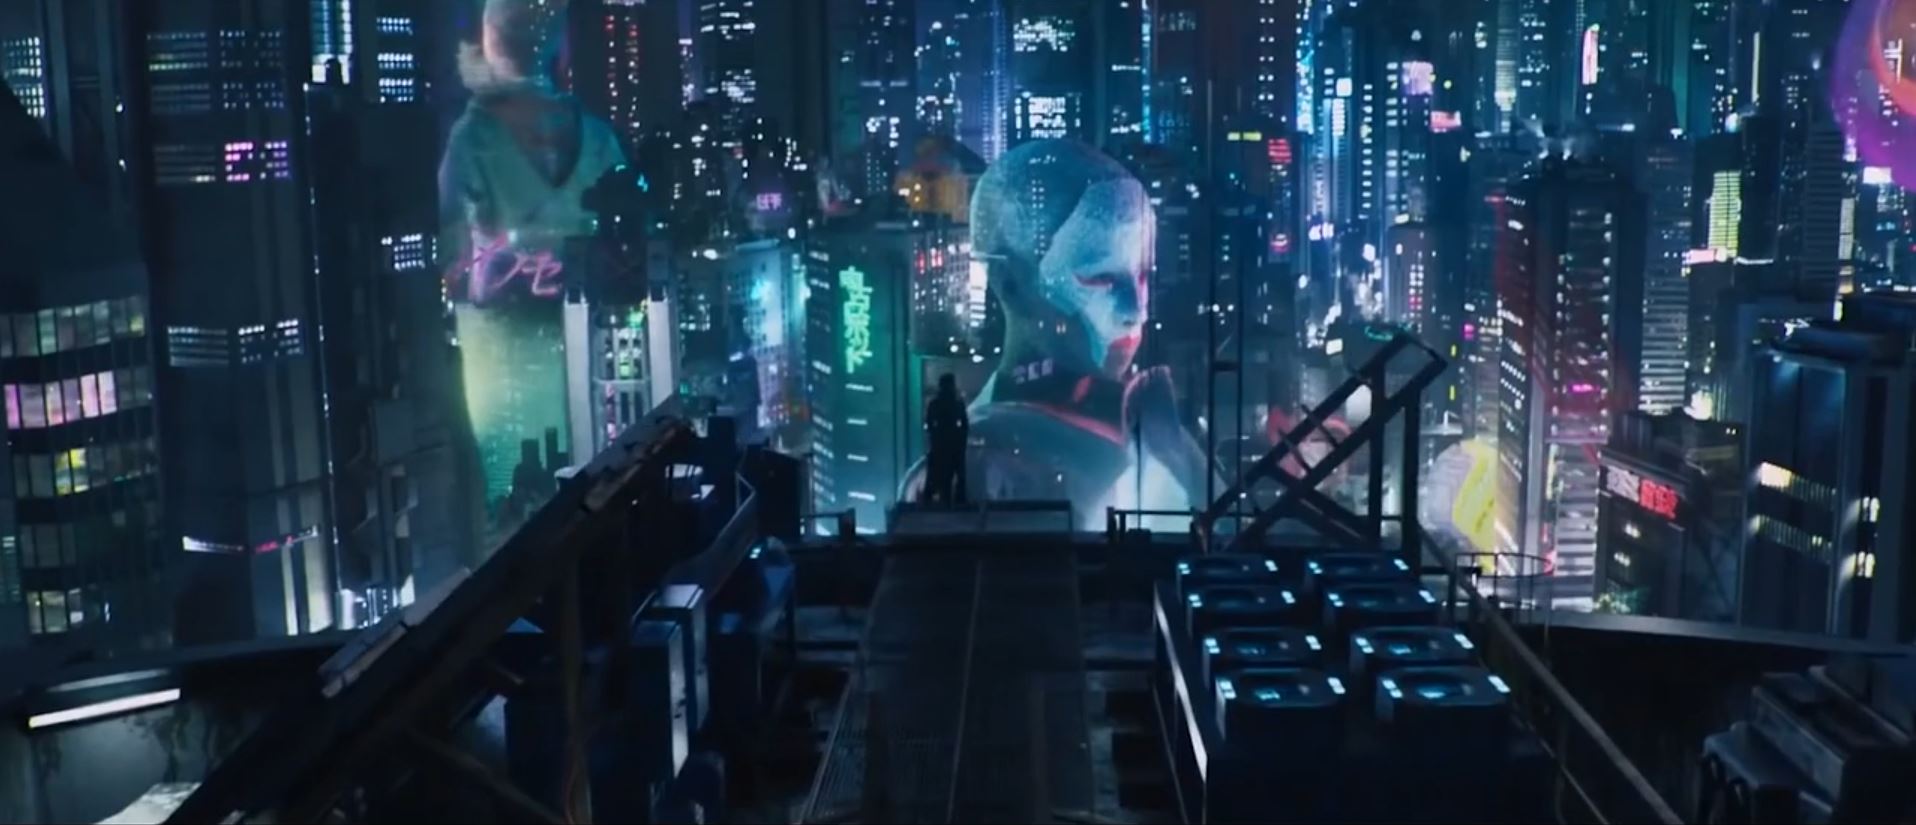 ghost in the shell city